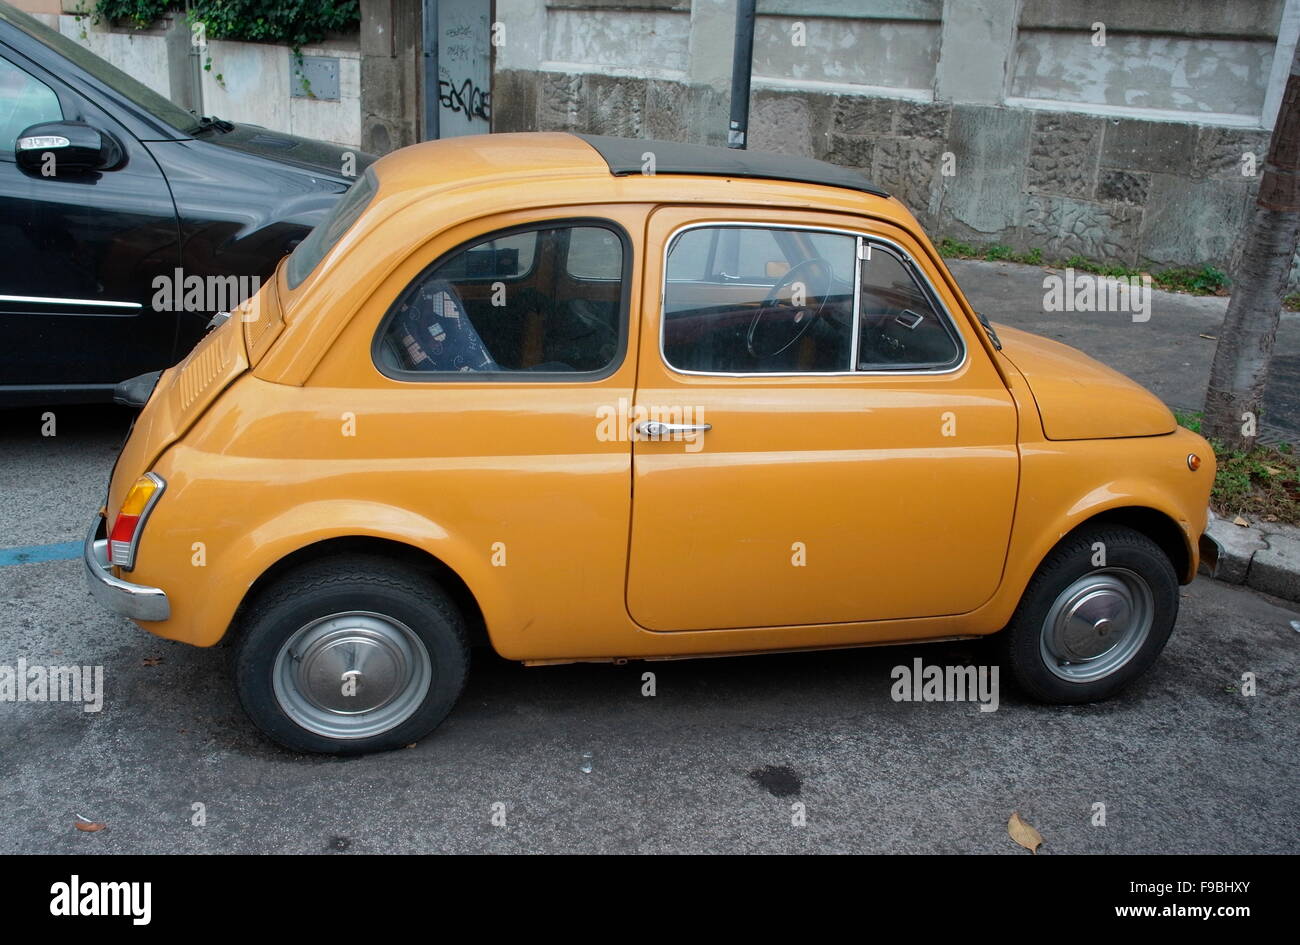 AJAXNETPHOTO. 2015. ROME, ITALY. - FIAT 500 CINQUECENTO - DANTE GIACOSA'S ORIGINAL 1957-1975 CITY CAR SALOON MODEL PARKED IN THE CITY. FIAT MADE MORE THAN 3MILLION OF THESE VEHICLES BEFORE PRODUCTION ENDED. PHOTO:JONATHAN EASTLAND/AJAX REF:GX151012 75885 Stock Photo